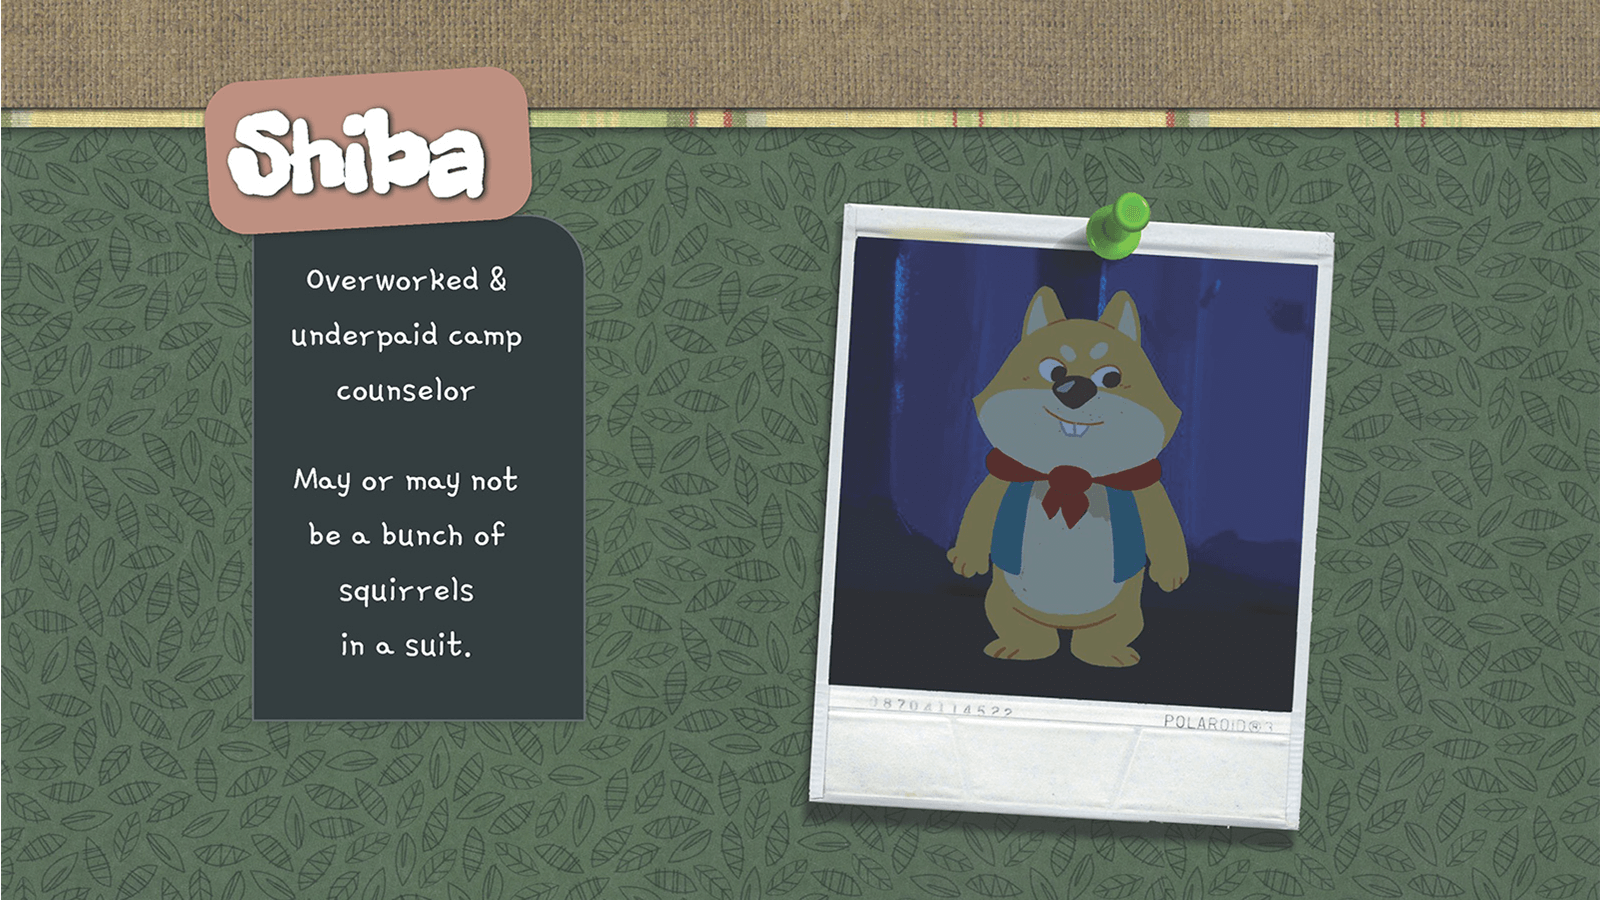 Description and look of the character Shiba.